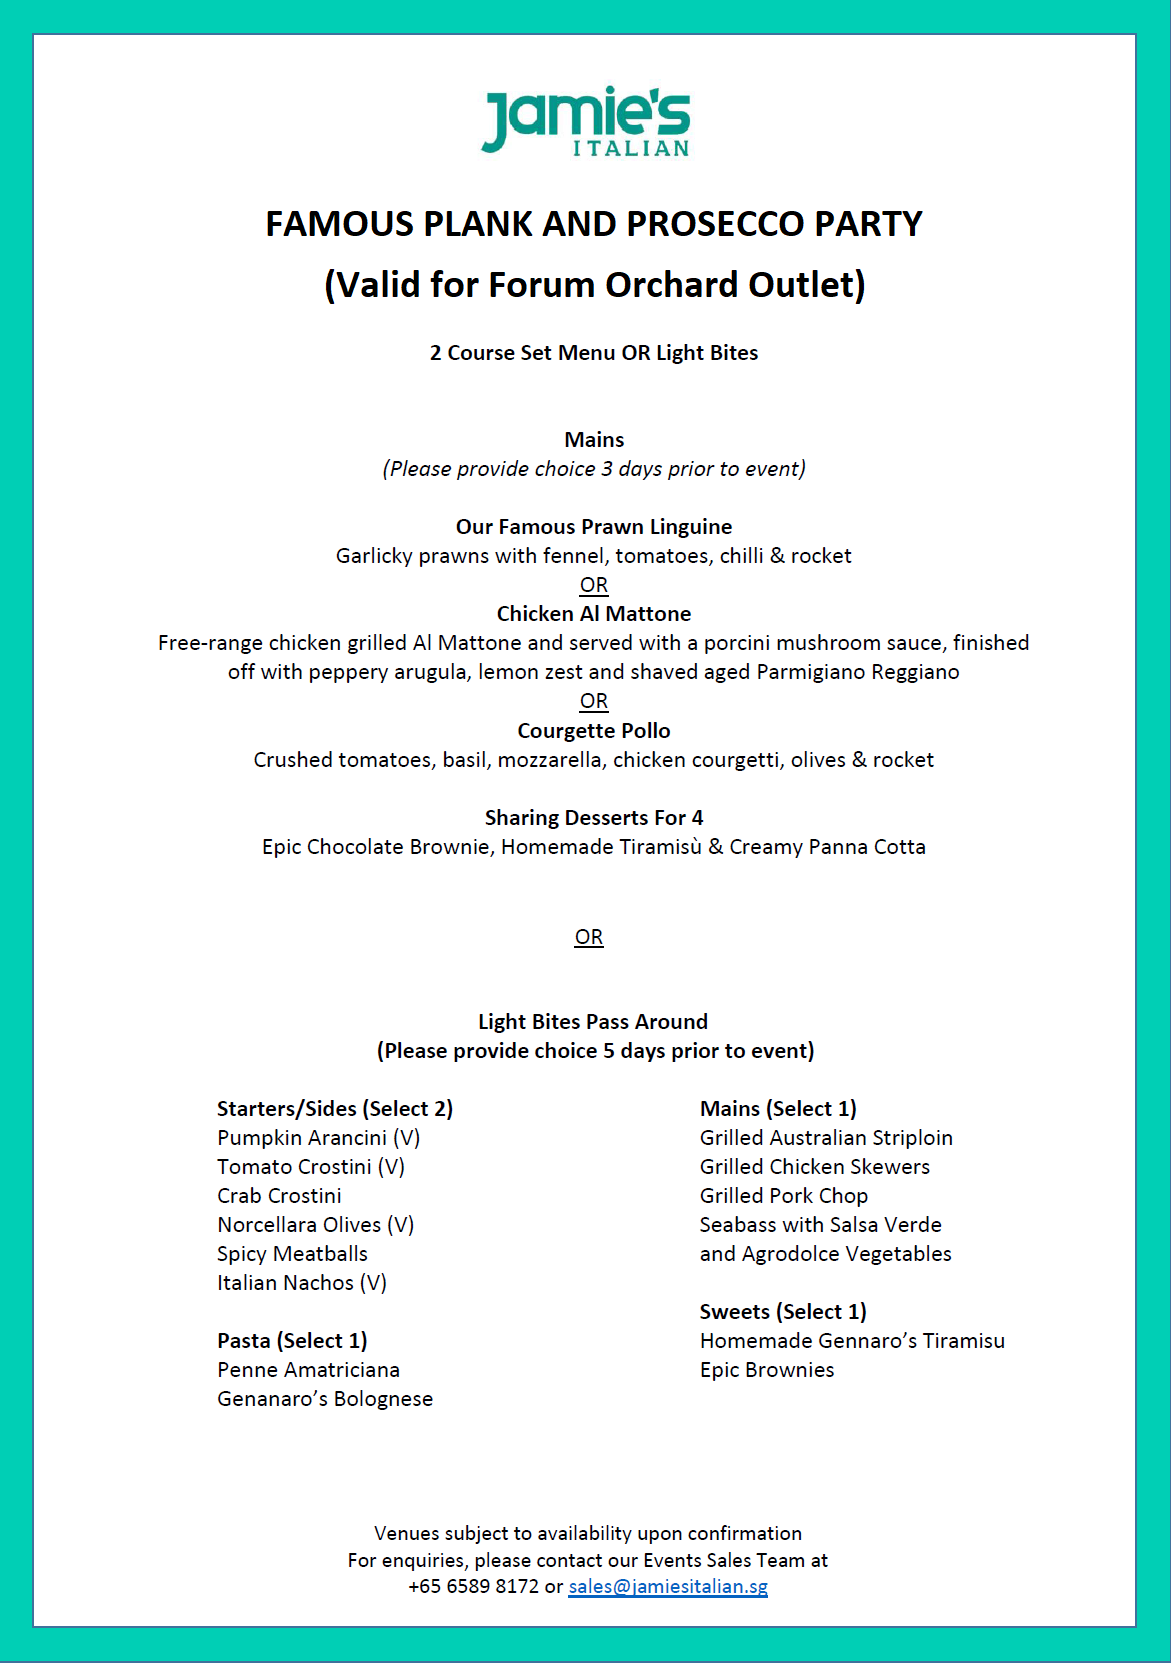 Famous Plank & Prosecco Party: Forum Orchard Menu